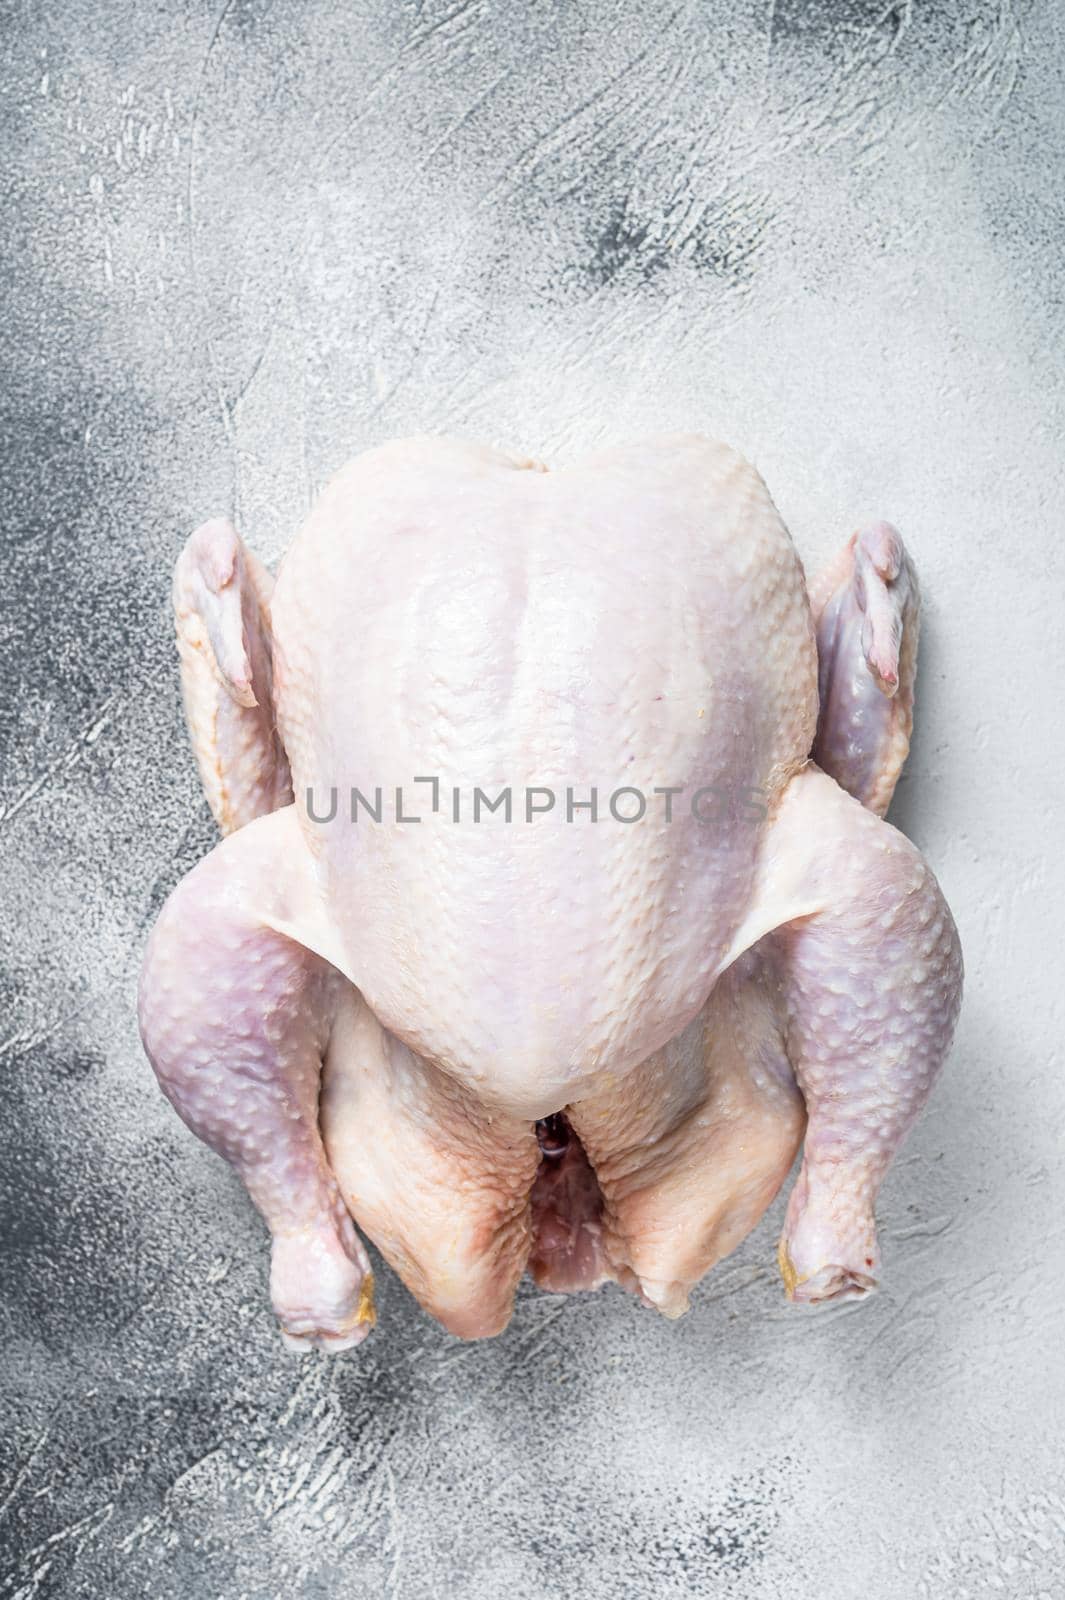 Raw free range whole chicken on a kitchen table. White background. Top view by Composter